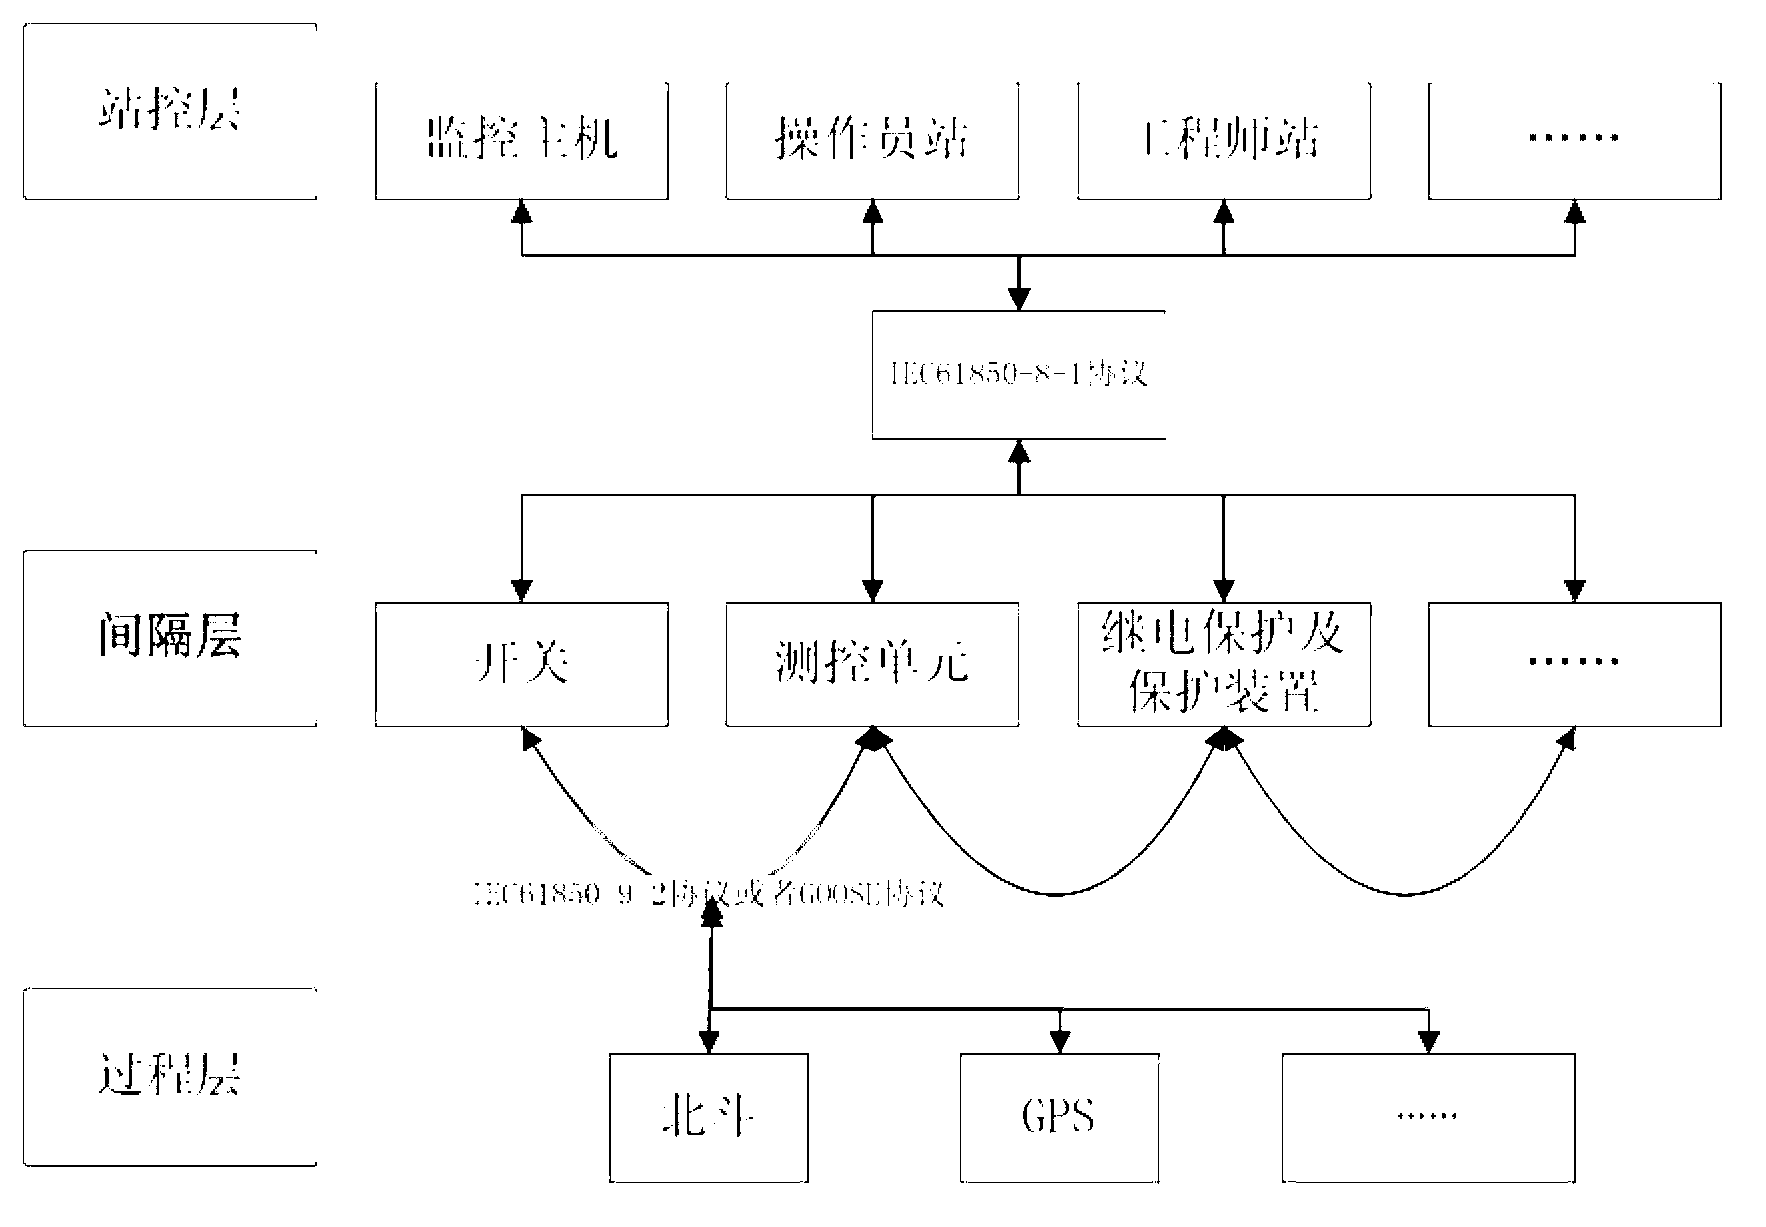 Information sharing and interoperating method for intelligent electrical devices of intelligent substation operation cockpit